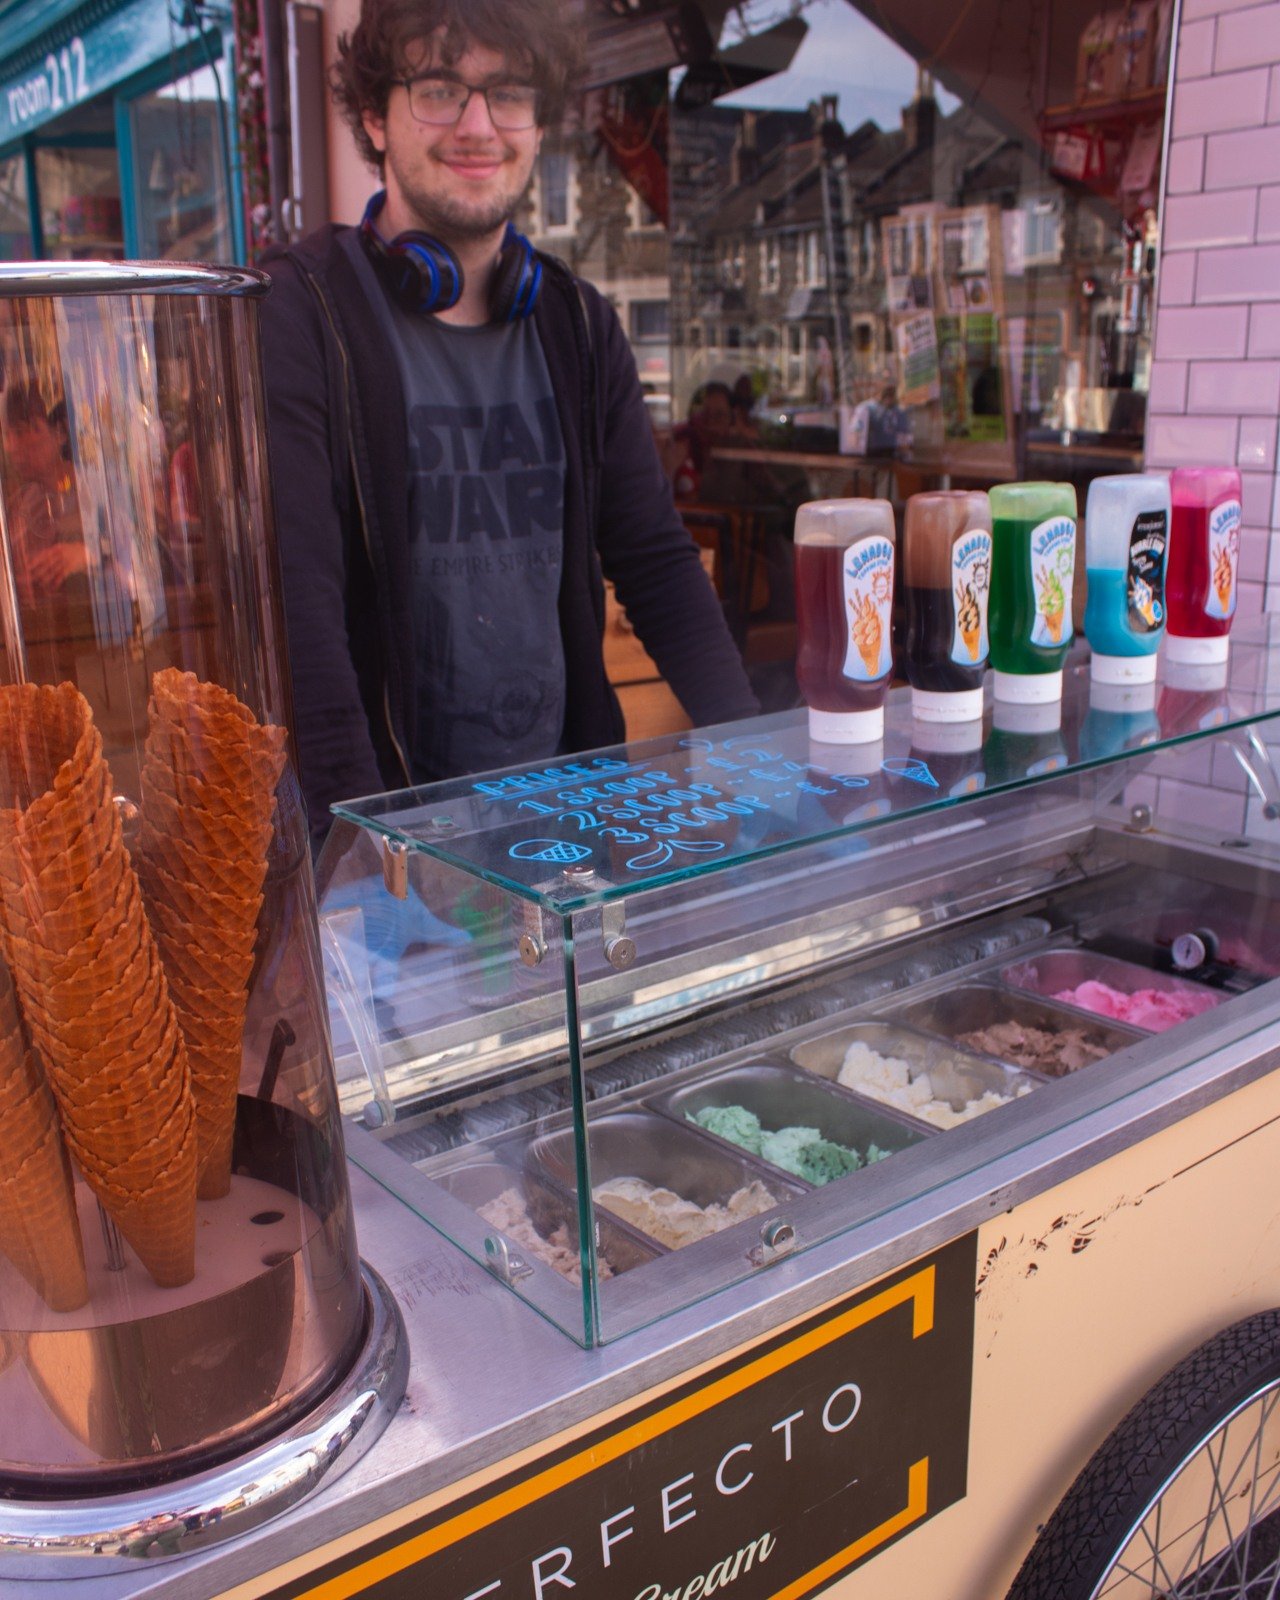 We have been absolutely loving the weather! ☀️🍦
And so have you guys, our man Felix has sold so many ice creams already. So if you're taking a stroll down Gloucester Road, make sure you stop by for an ice cream! 🍦✨

#gloucesterroad #icecream #perfe